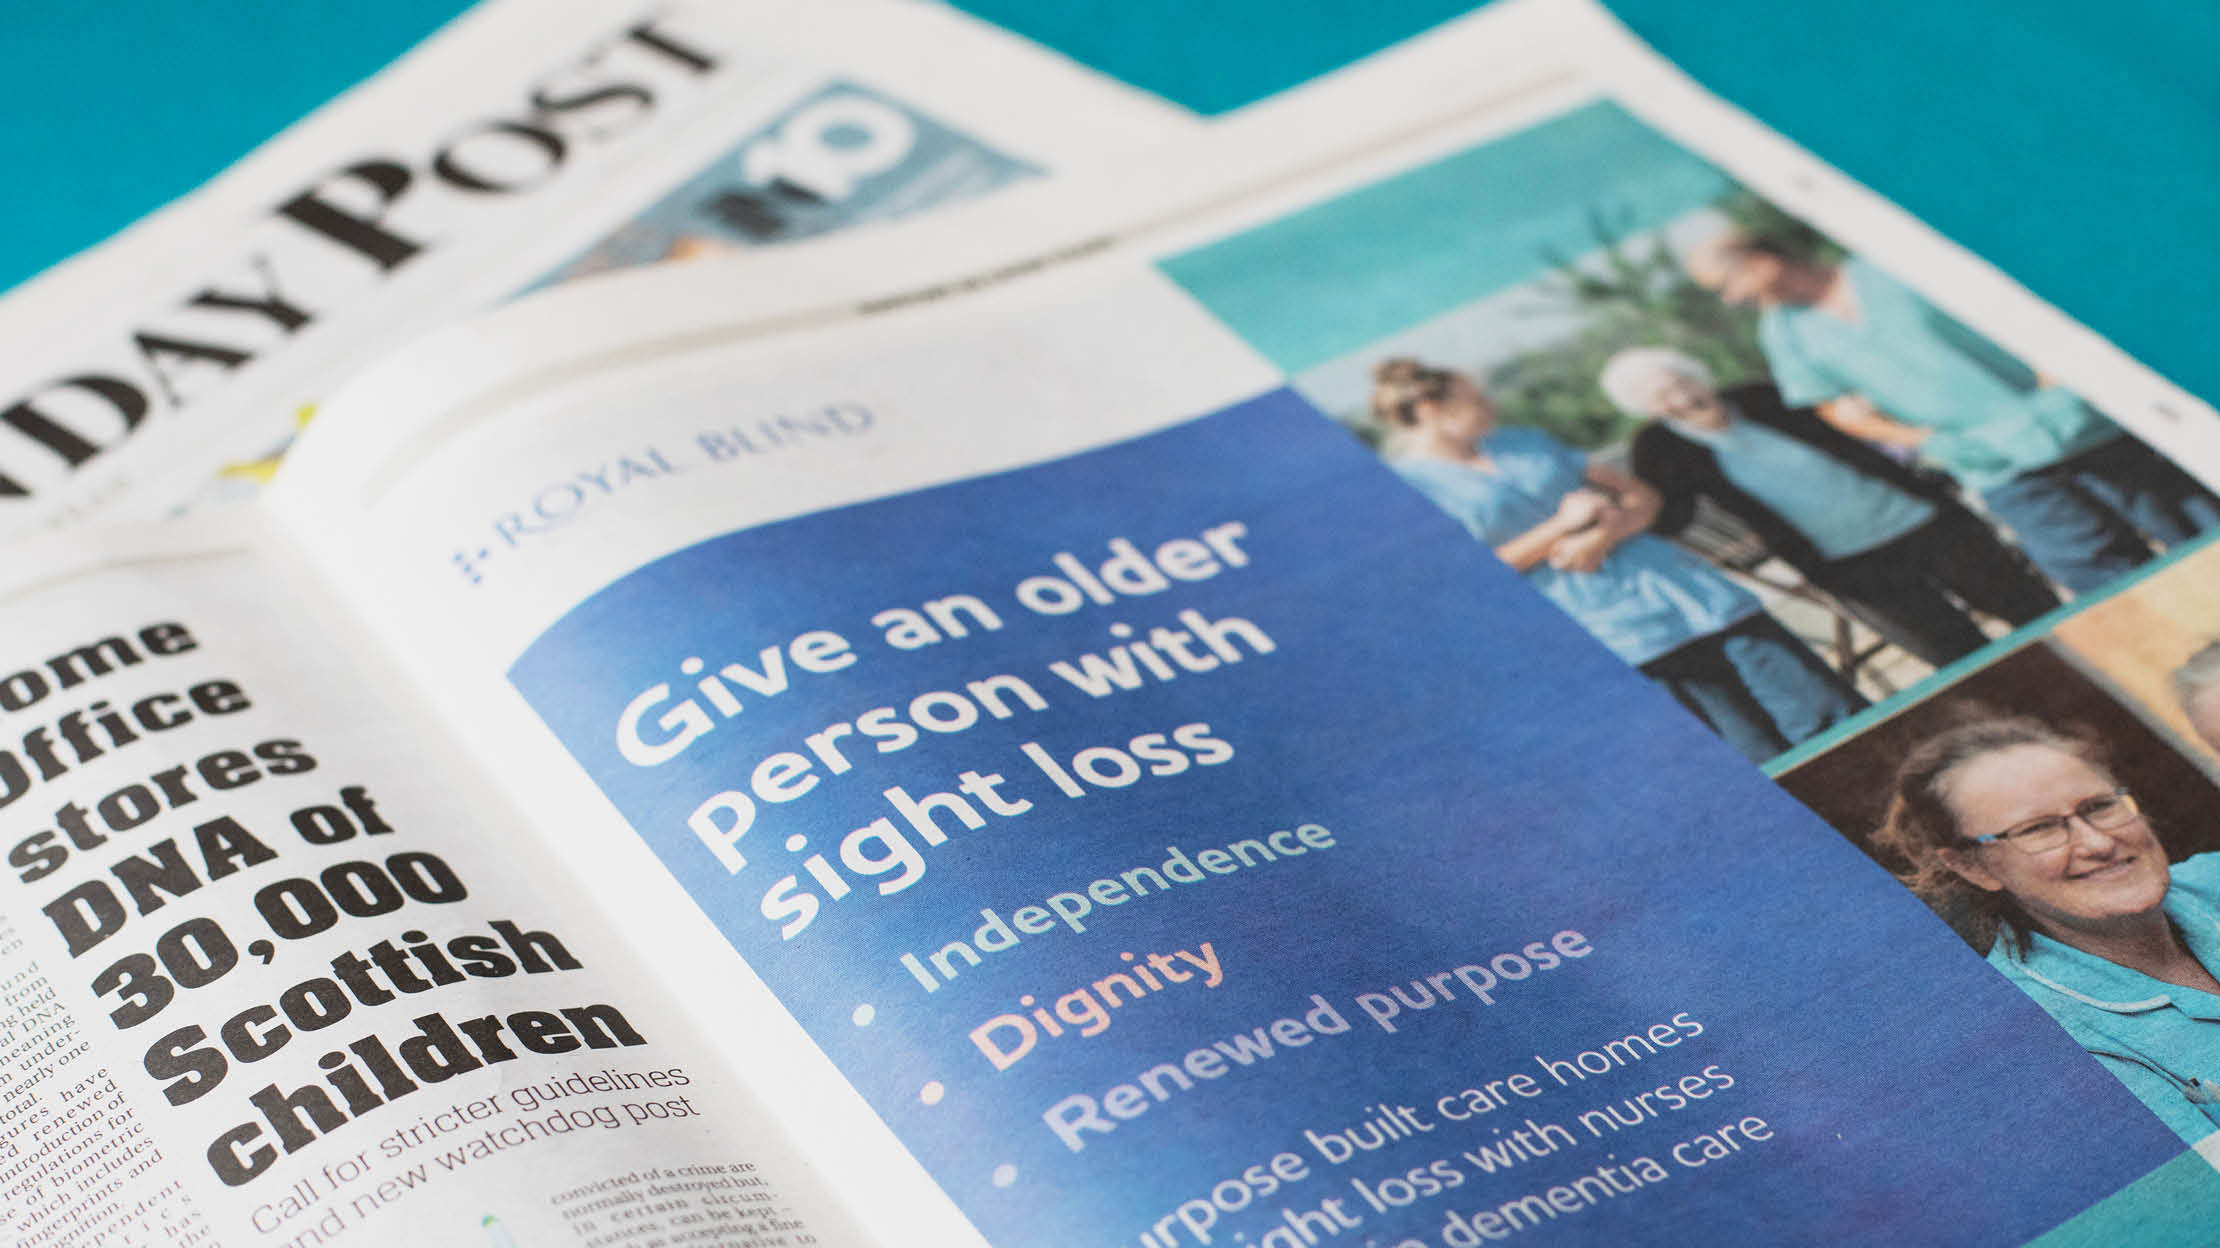 Newspaper spread caption "Give an older person with sight loss".